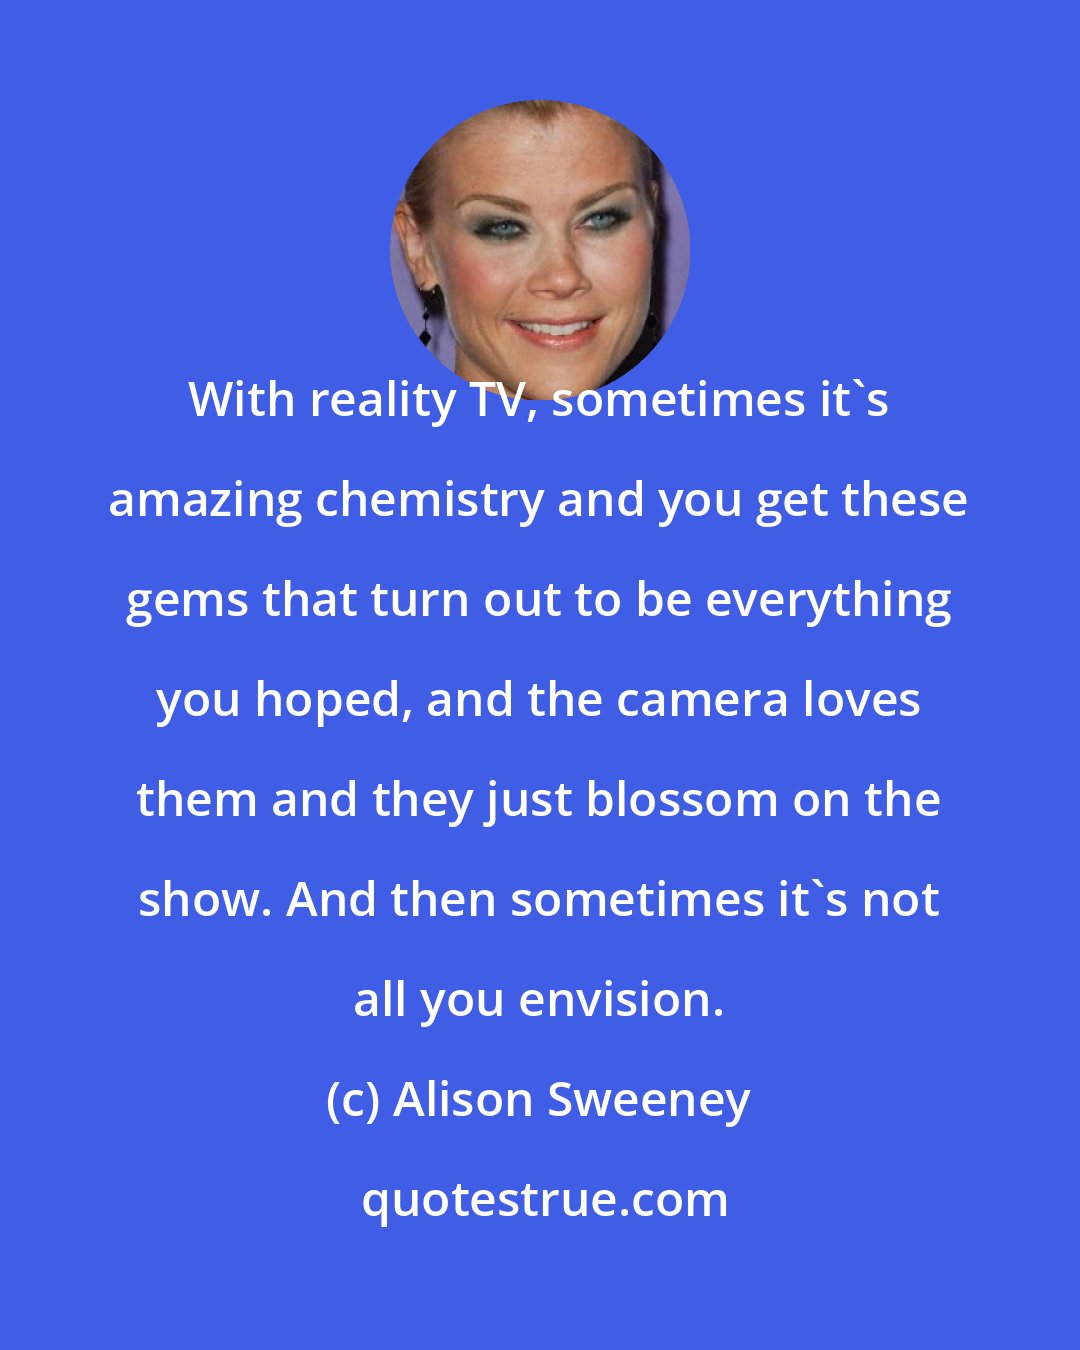 Alison Sweeney: With reality TV, sometimes it's amazing chemistry and you get these gems that turn out to be everything you hoped, and the camera loves them and they just blossom on the show. And then sometimes it's not all you envision.